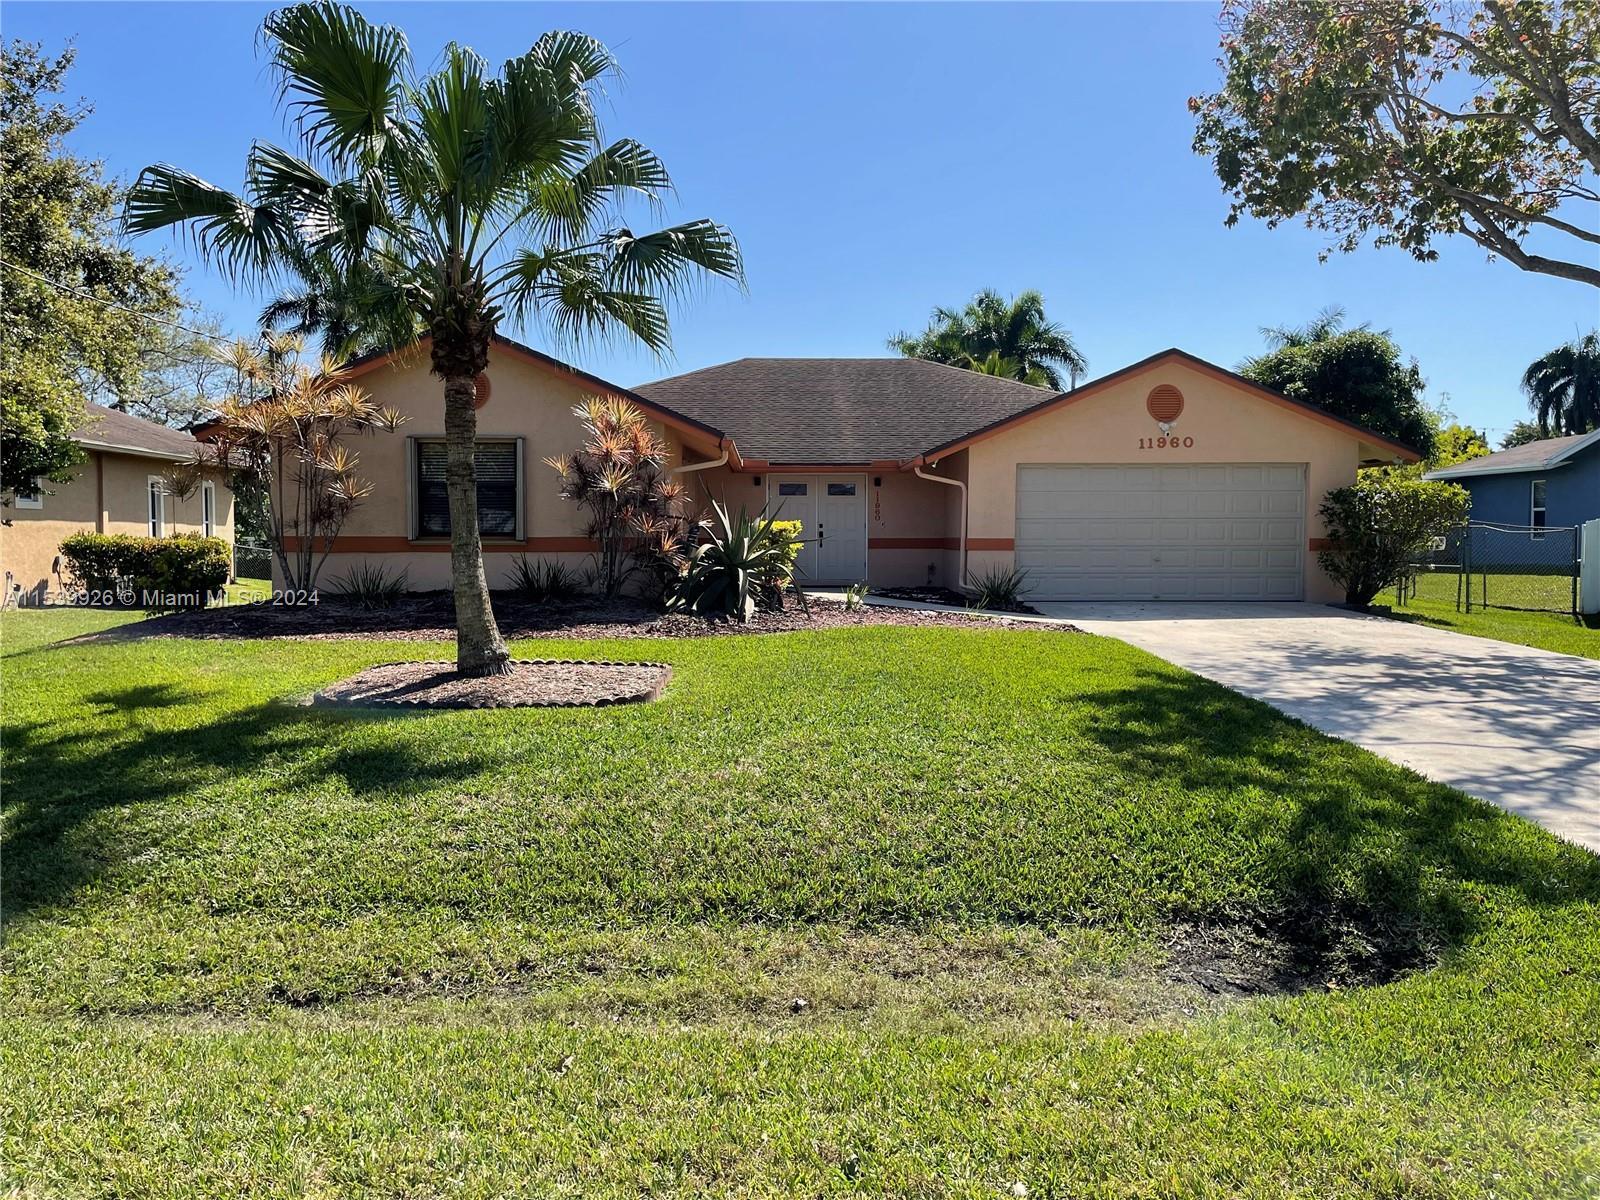 Photo of 11960 NW 27th Ct in Plantation, FL